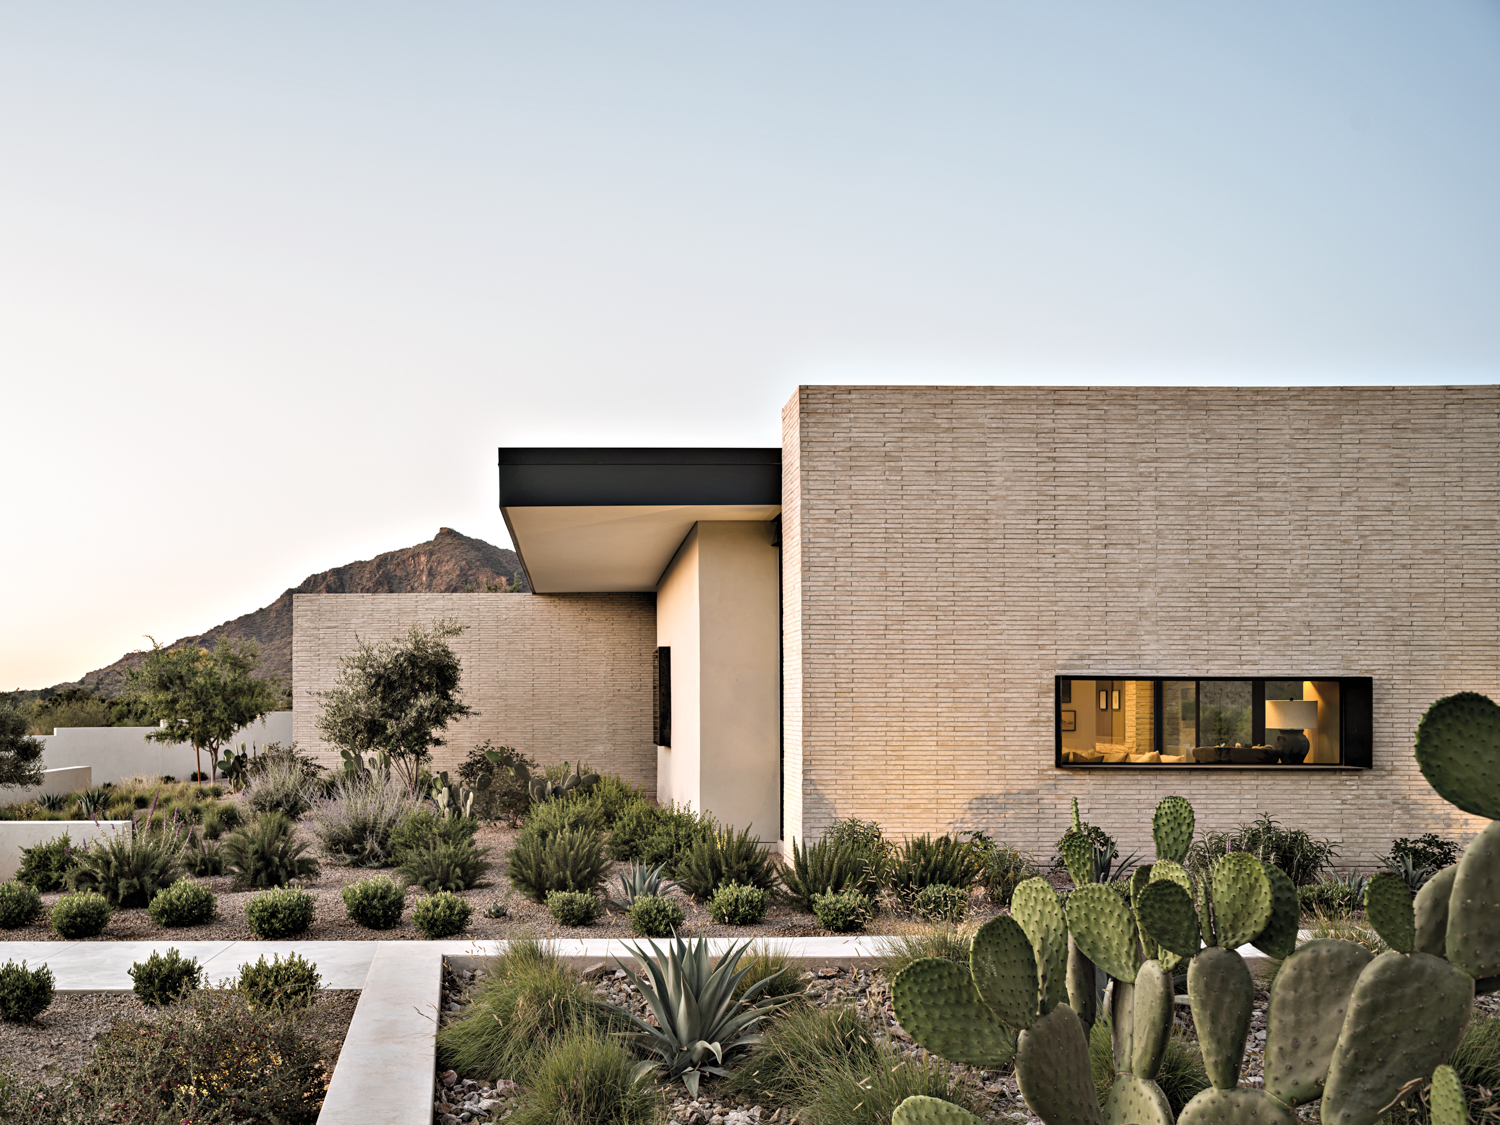 How A Cross-Country Road Trip Led To A Couple’s New Desert Home